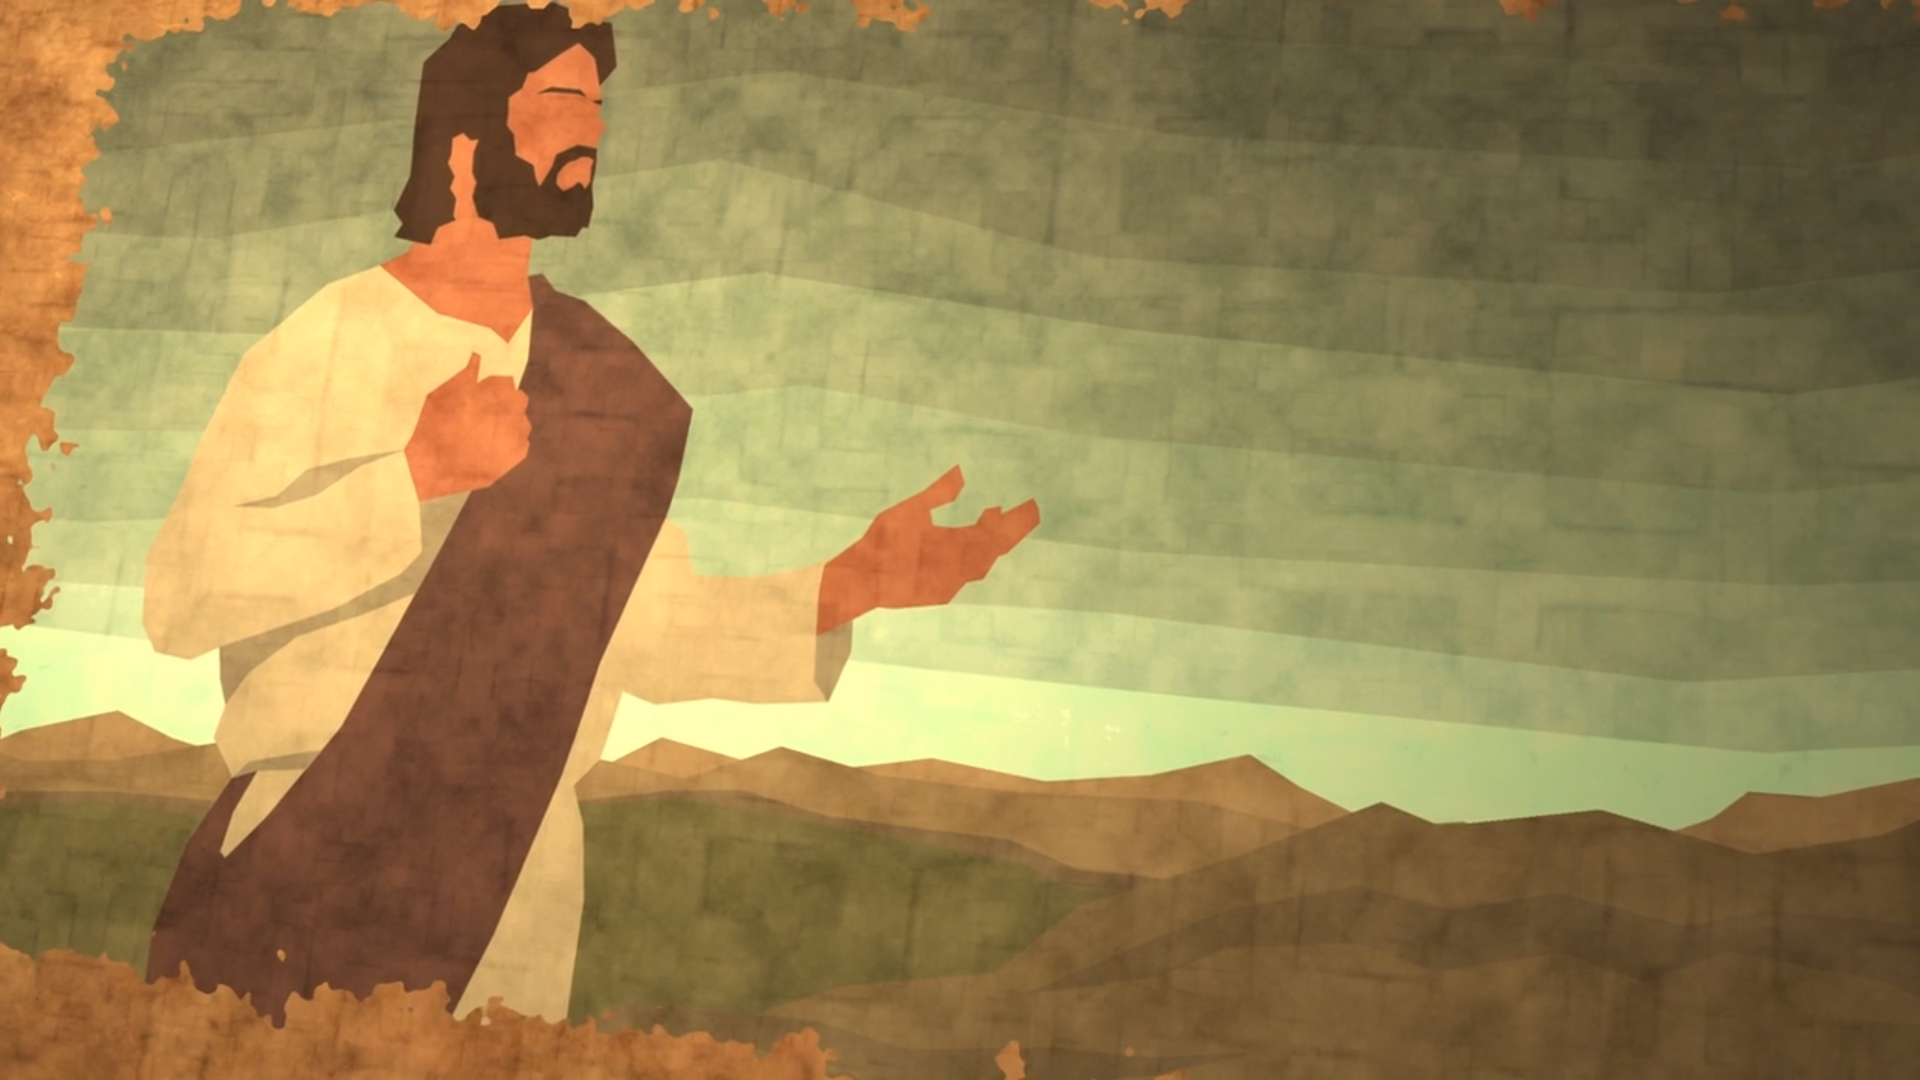 Jesus Teaches in Parables